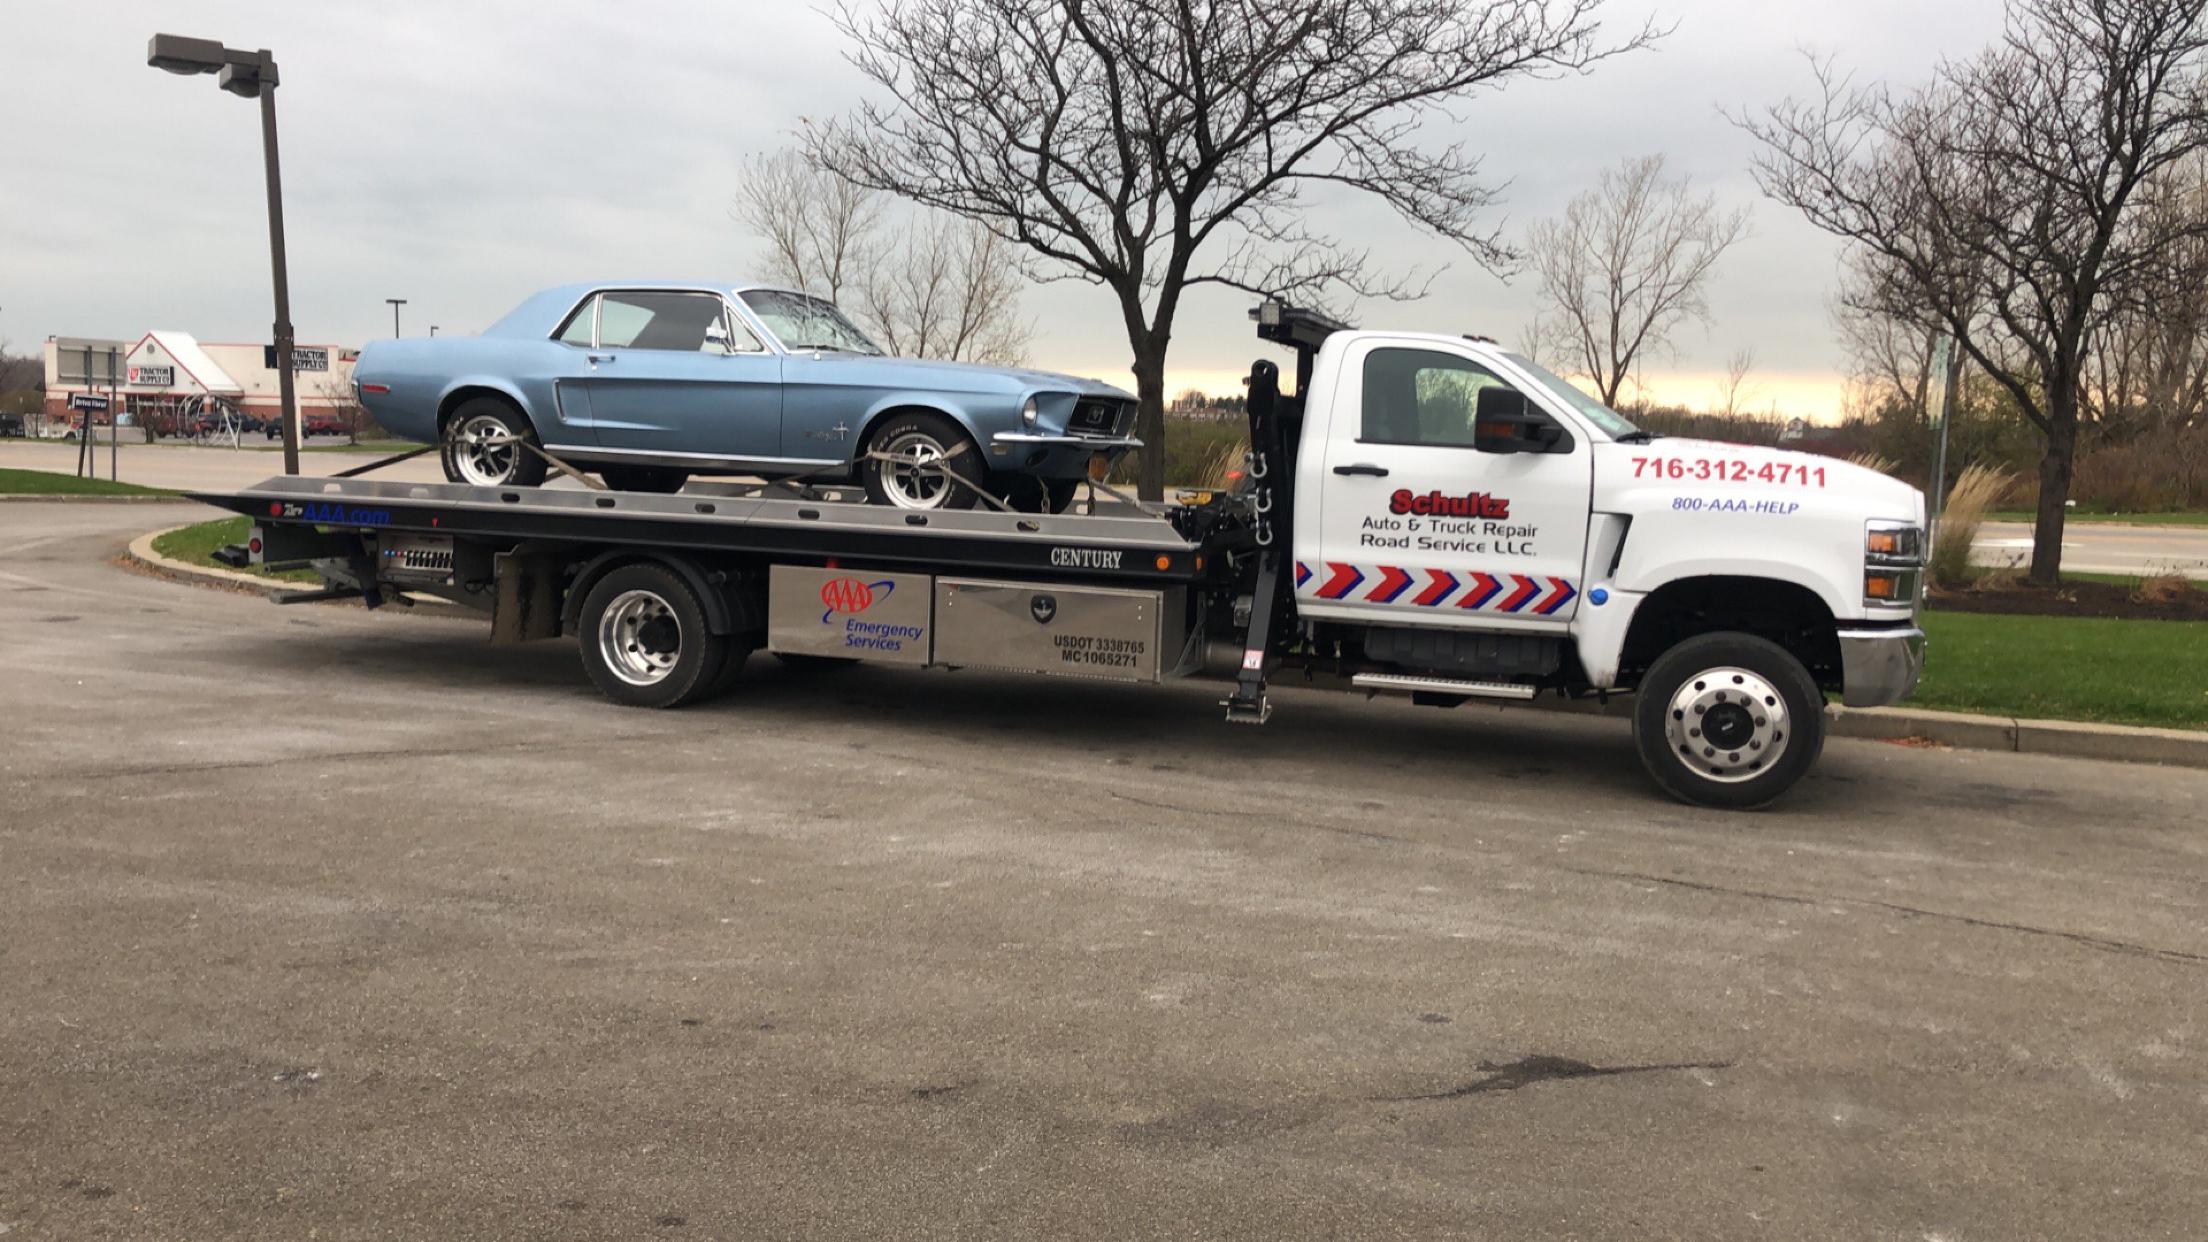 Schultz Auto, Truck Repair, Road Service and Towing Photo